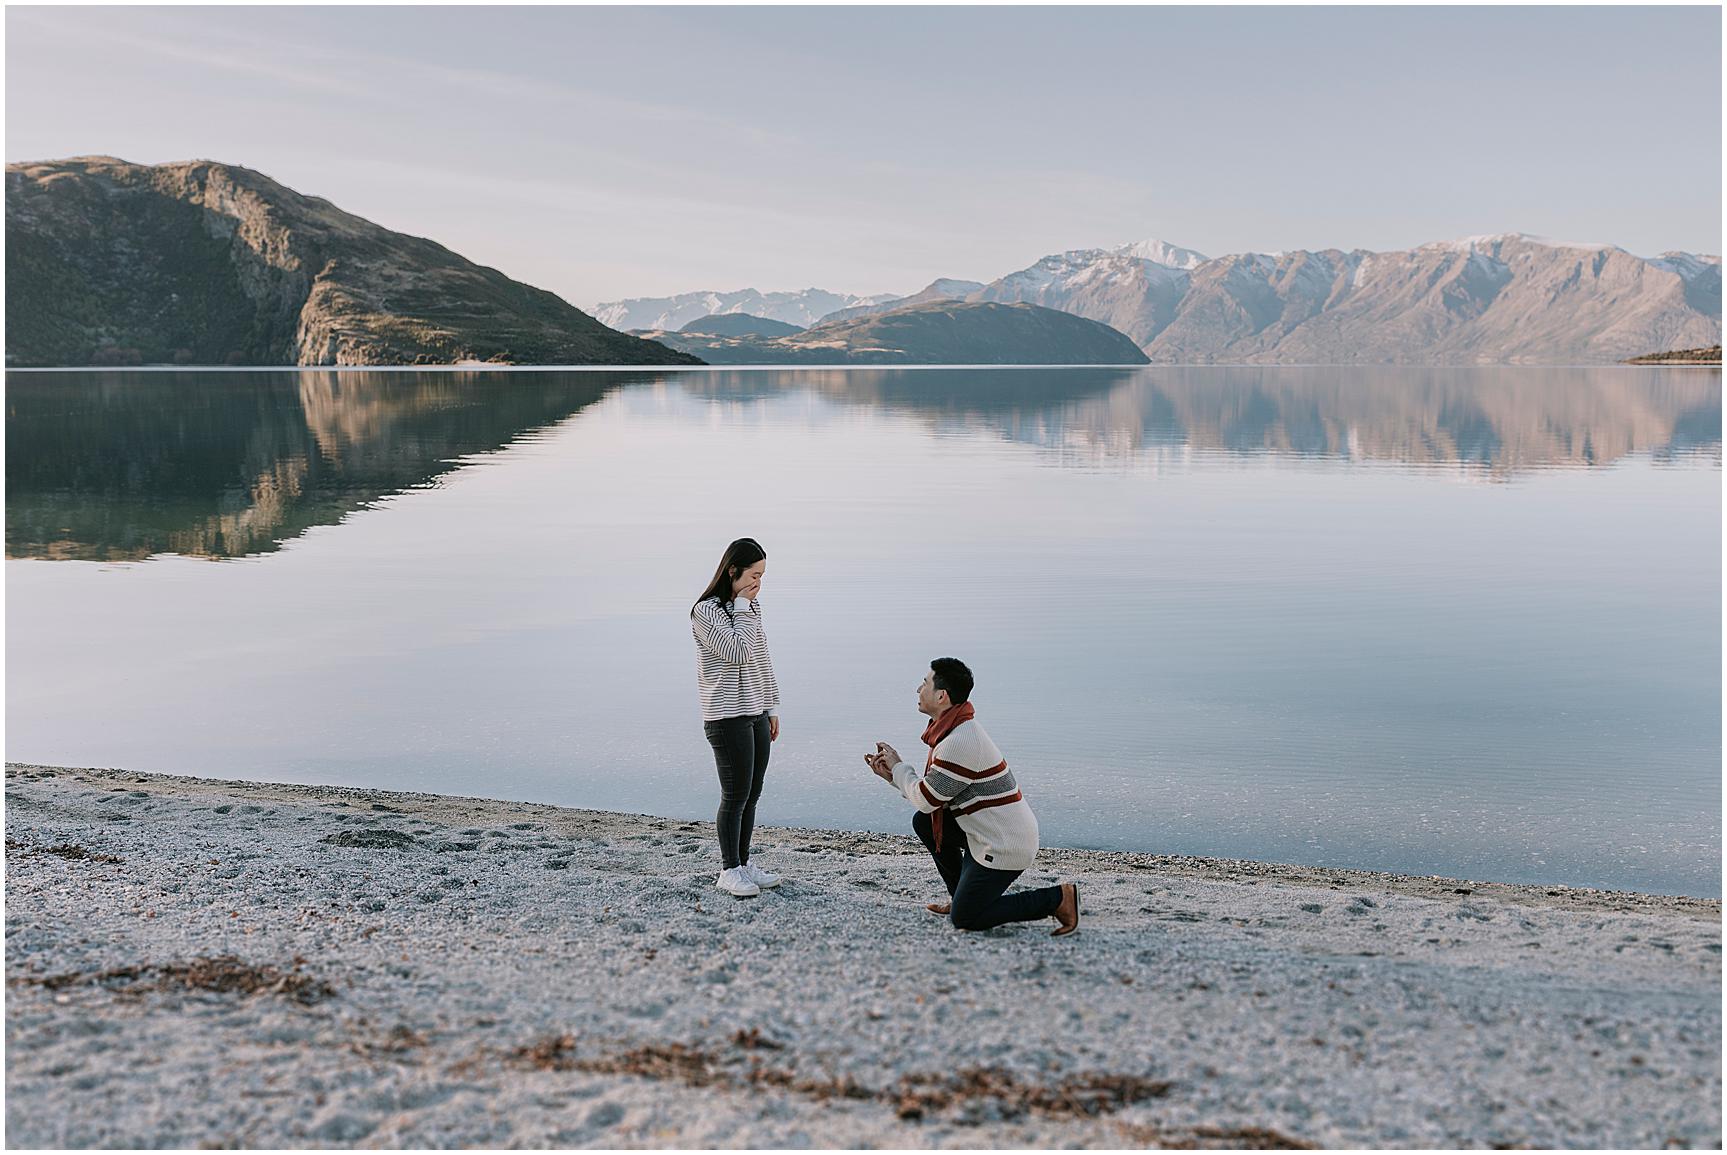 Charlotte Kiri Photography - Engagement Photography with a smart hopeful man proposing on bended knee to his happily stunned partner on the edge of a still lake with breathtaking snow-capped mountains behind at Matakauri Lodge in Wanaka, New Zealand